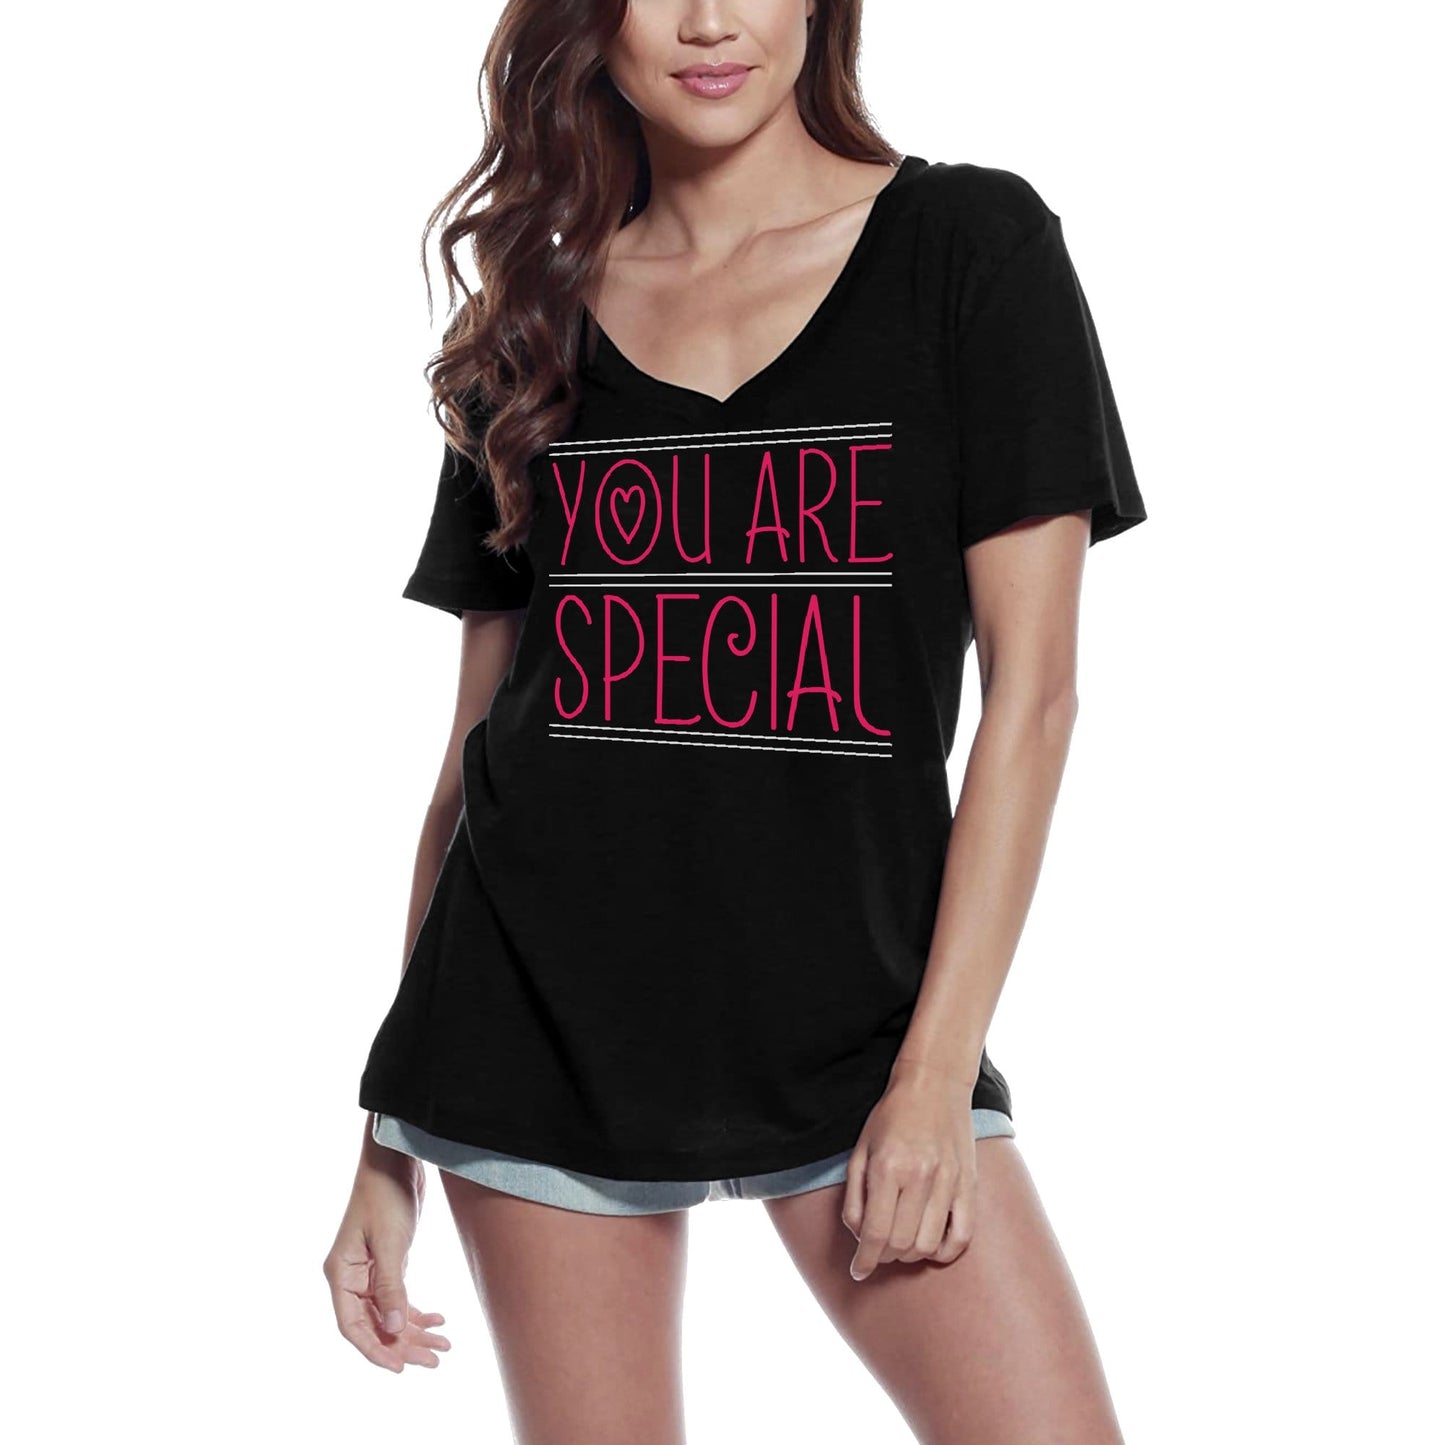 ULTRABASIC Women's T-Shirt You Are Special - Mom Short Sleeve Tee Shirt Tops